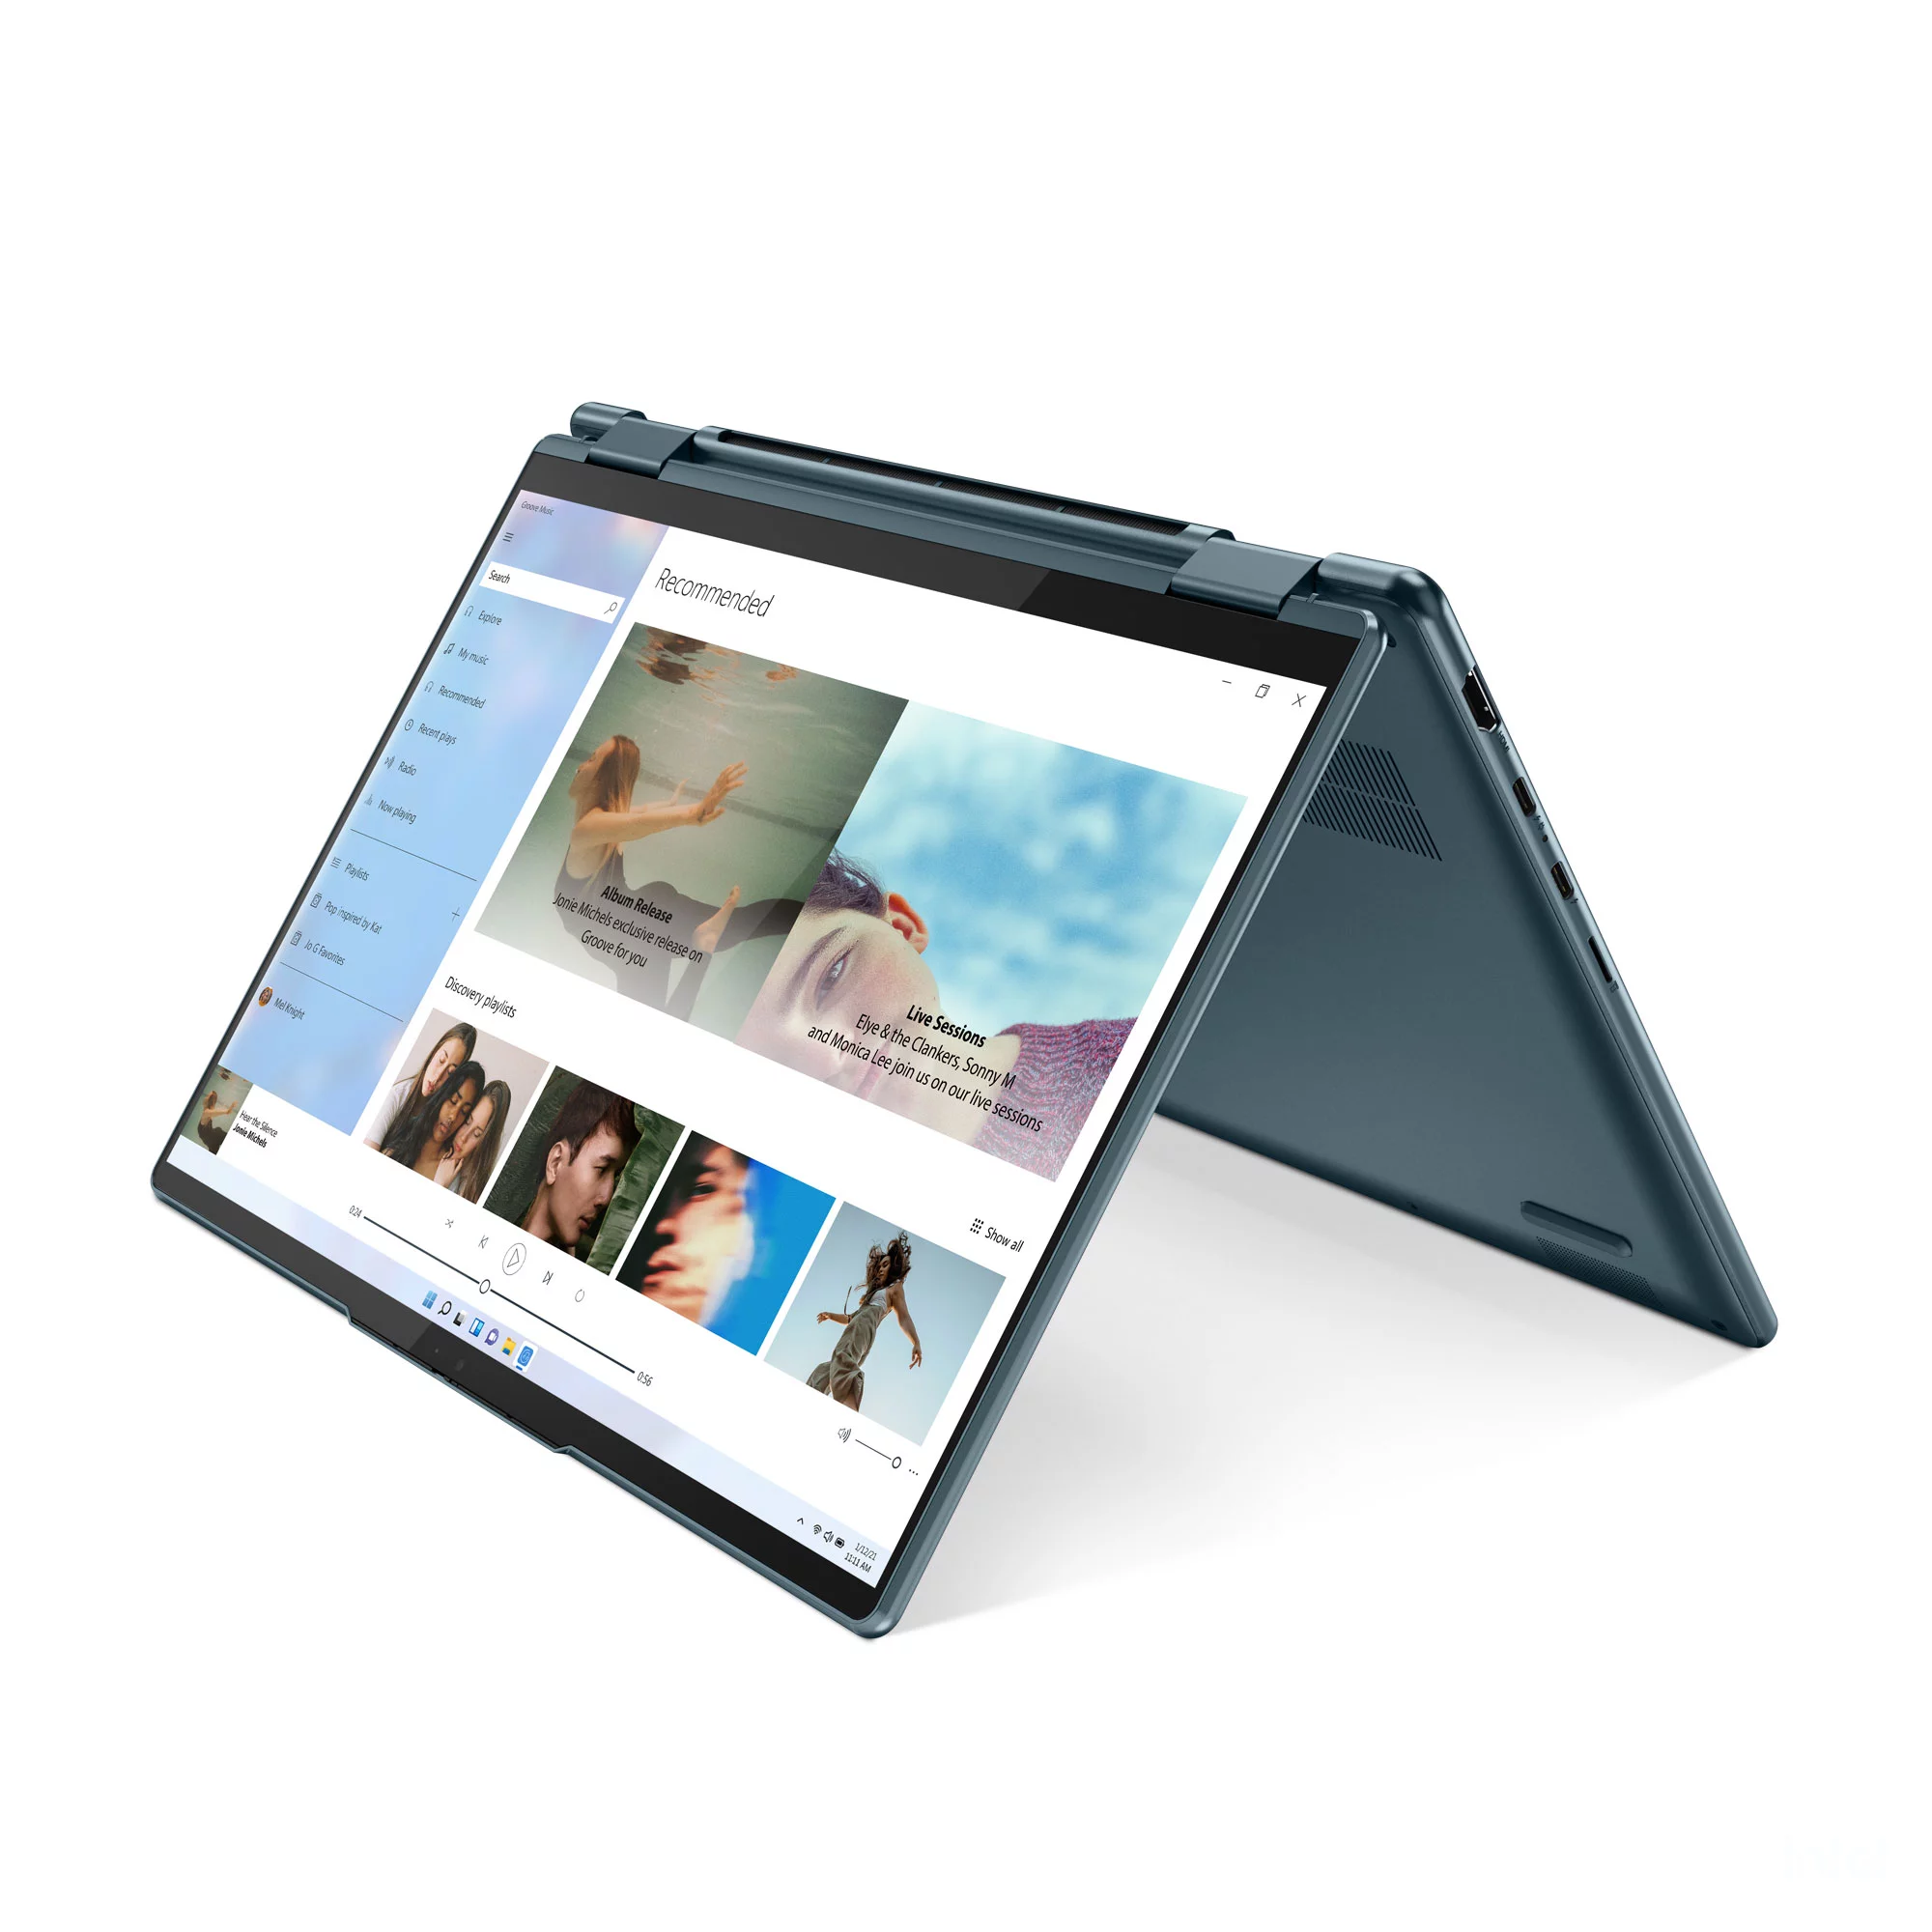 Intel Core Ultra 5 125H & Ultra 7 155H Lenovo Yoga laptops listed in  Bulgaria starting from $1,400 